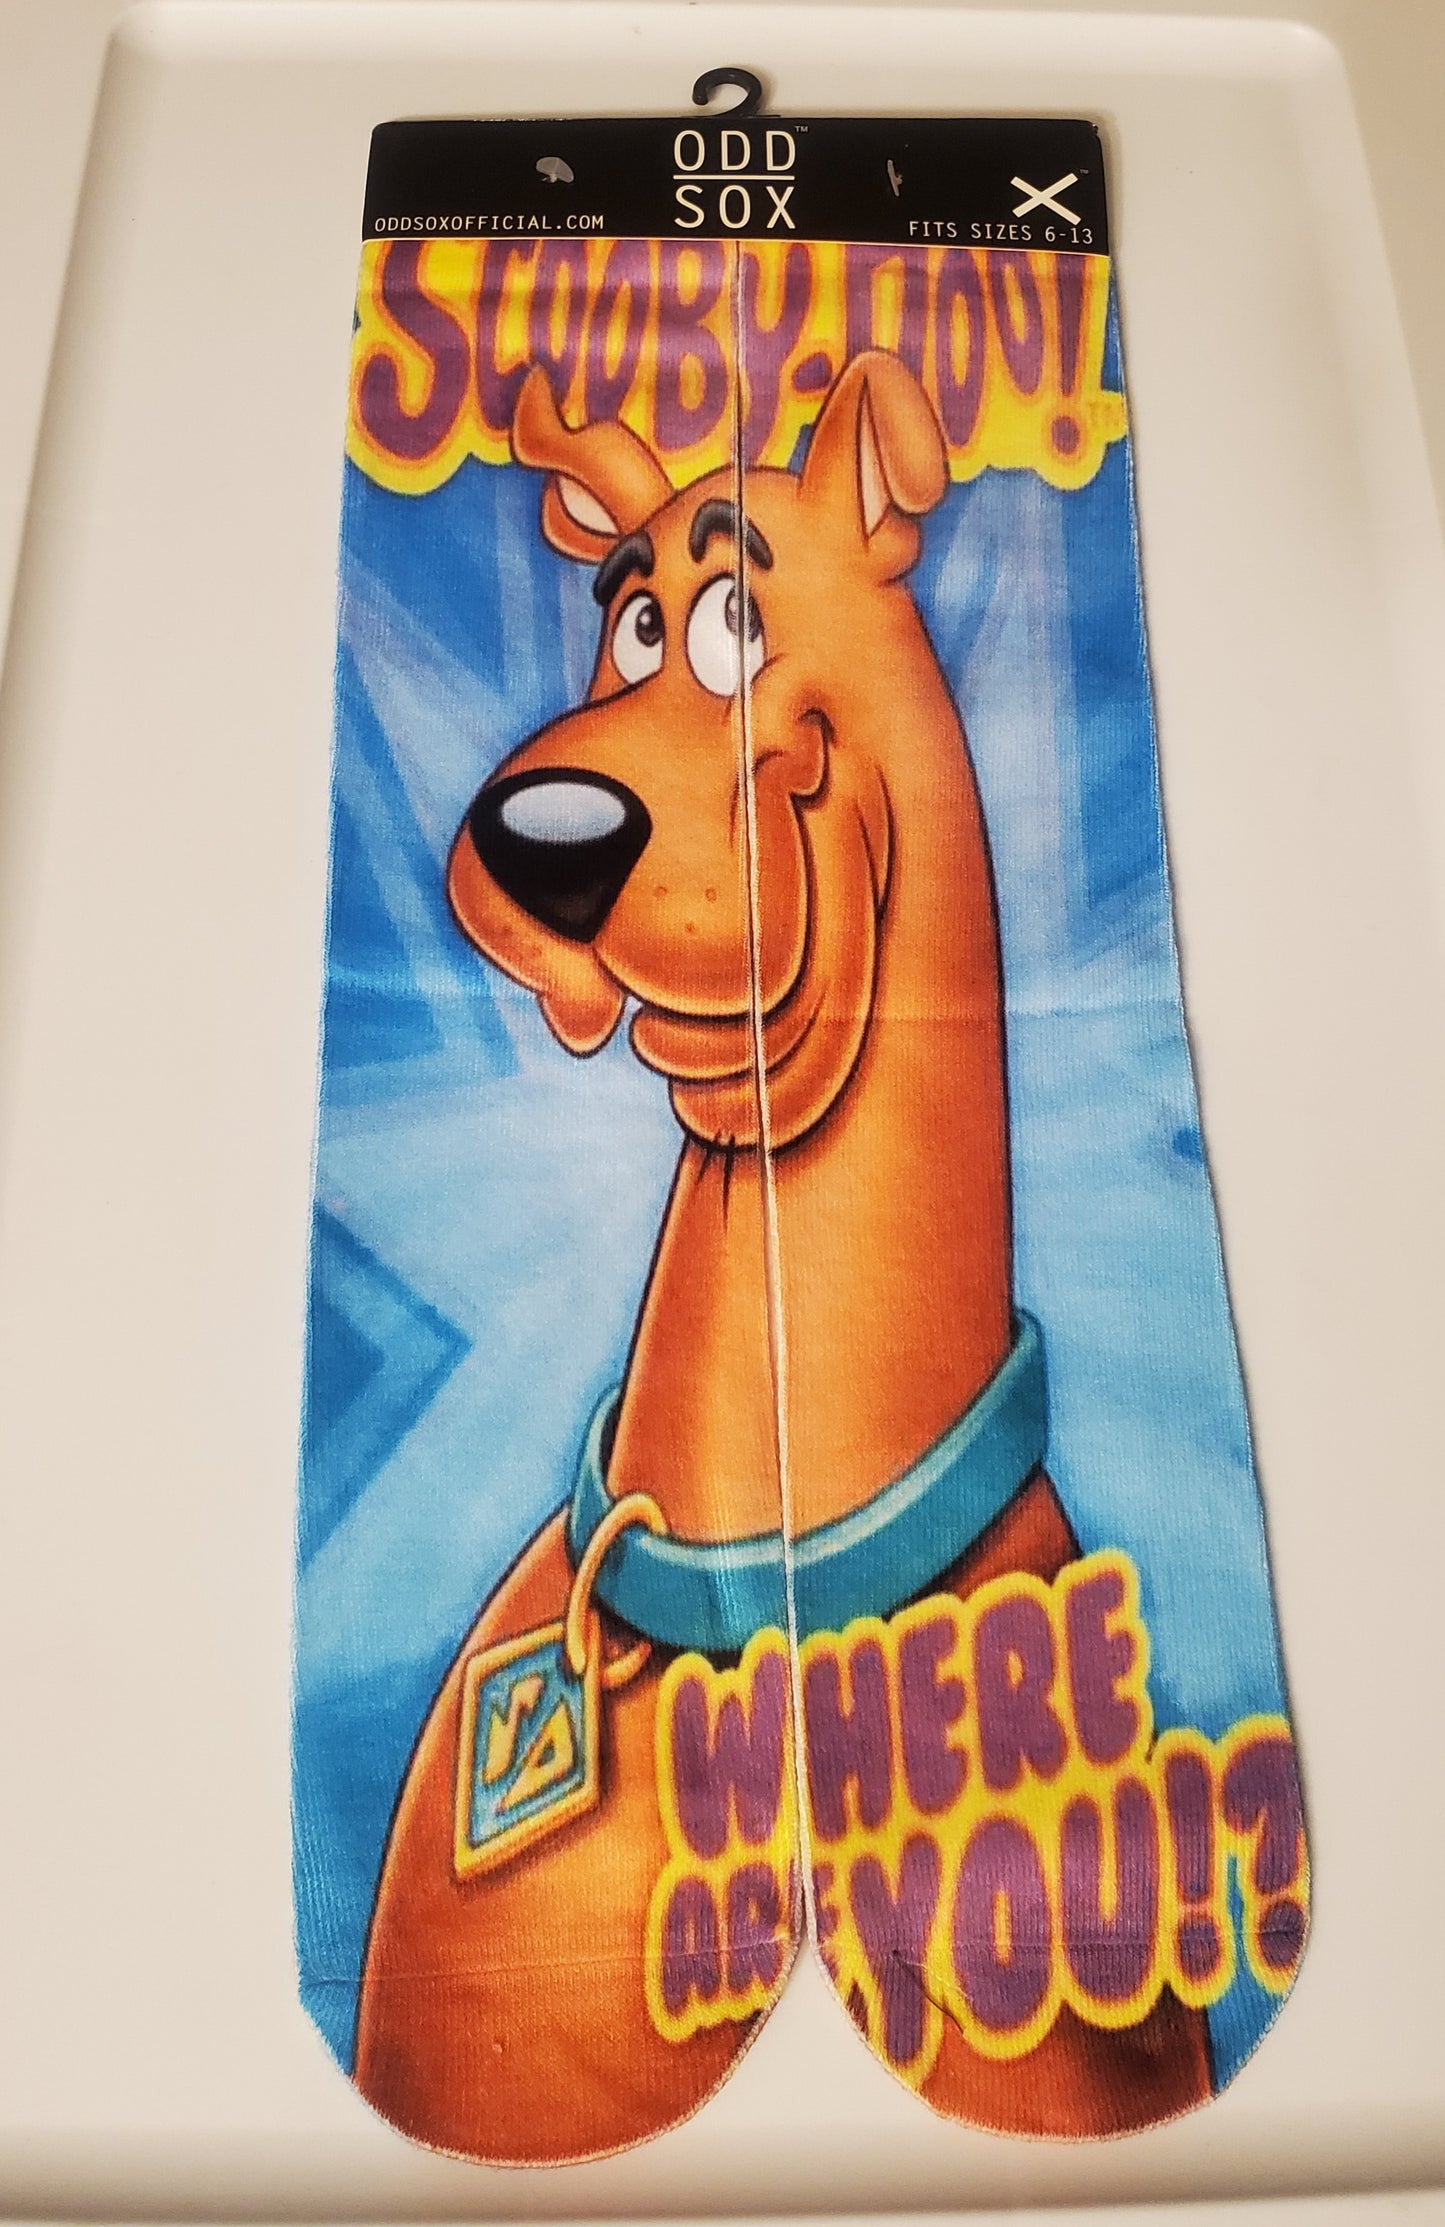 Scooby Doo (where are you)